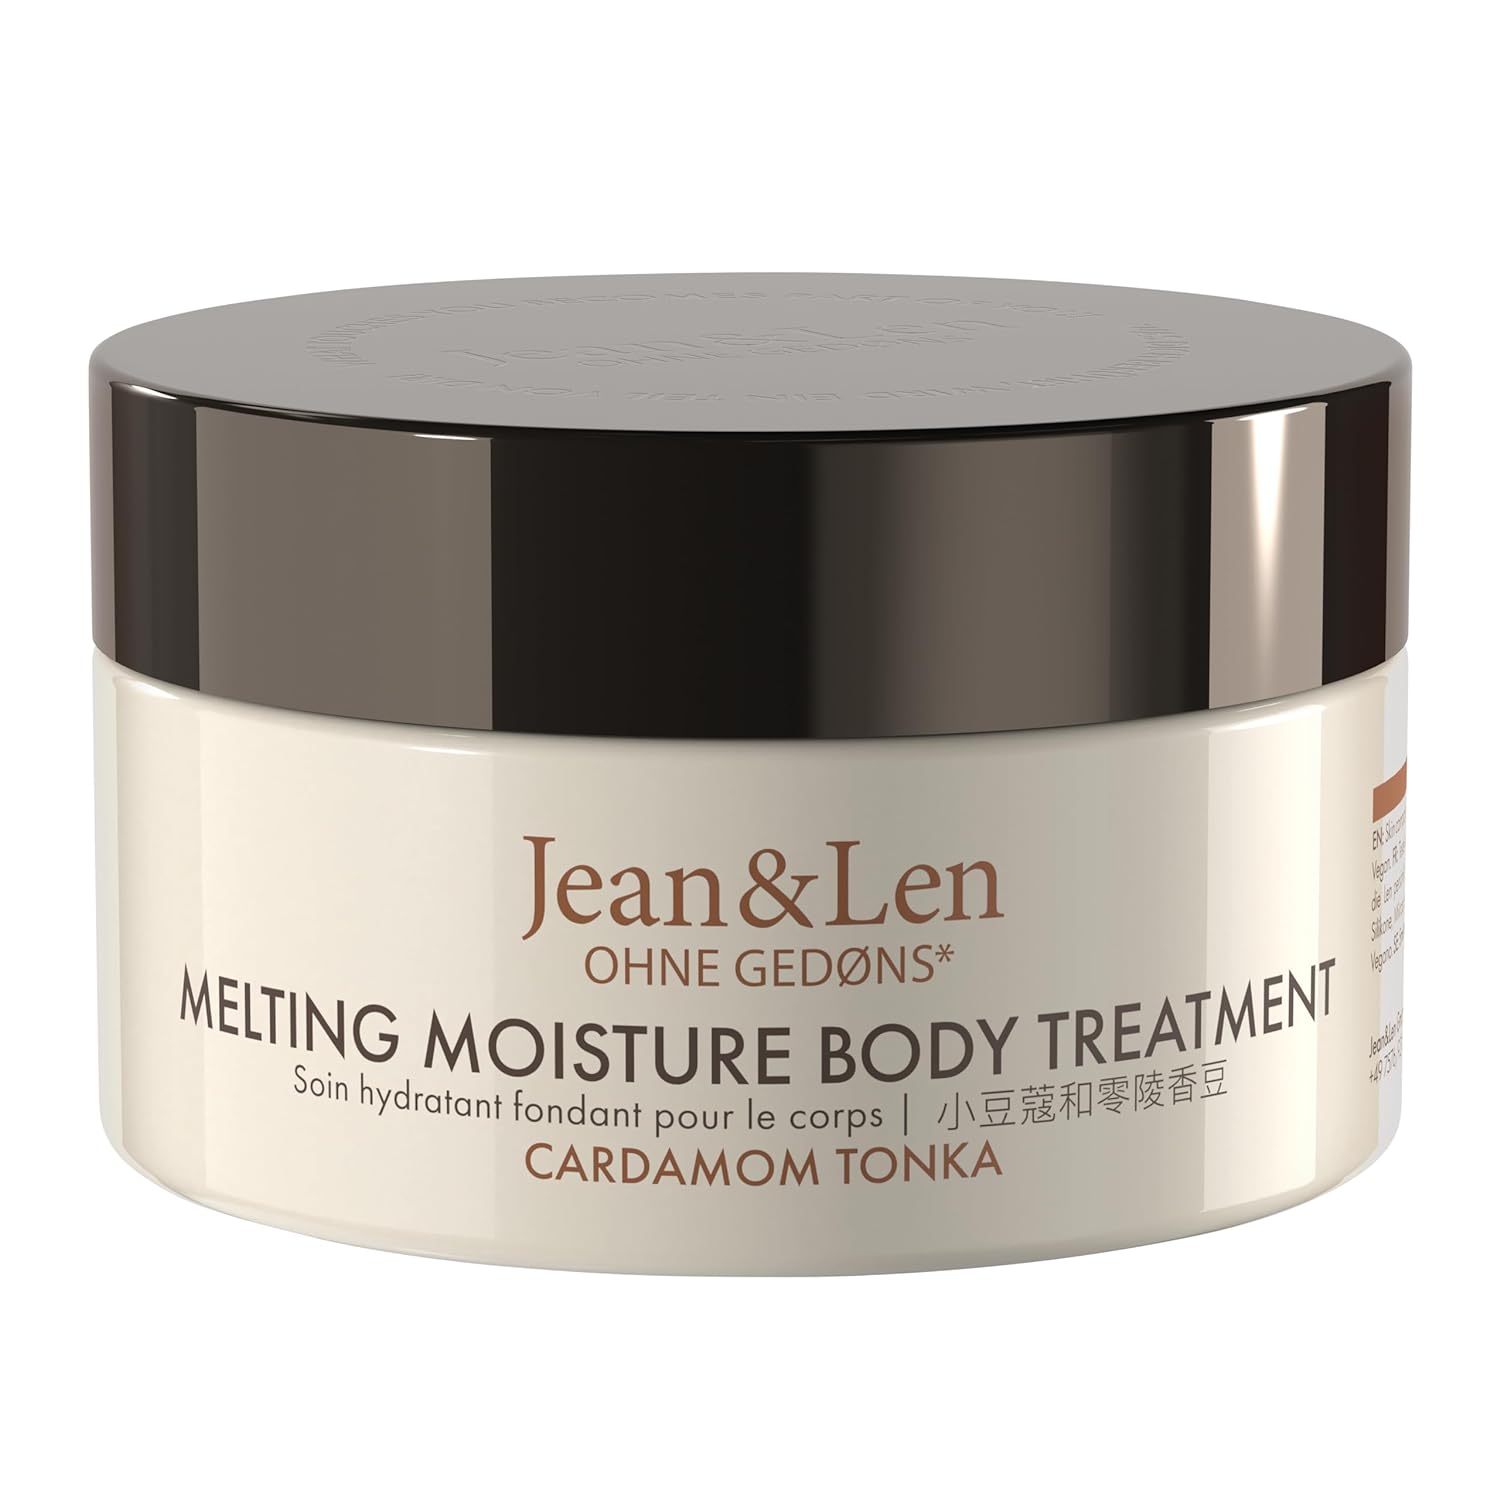 Jean & Len Melting Moisture Body Treatment Cardamom & Tonka, for a Scented Care Result, For Normal Skin, High-Quality Jar, Nourishing Body Butter, Parabens & Silicones, Vegan, 200 ml